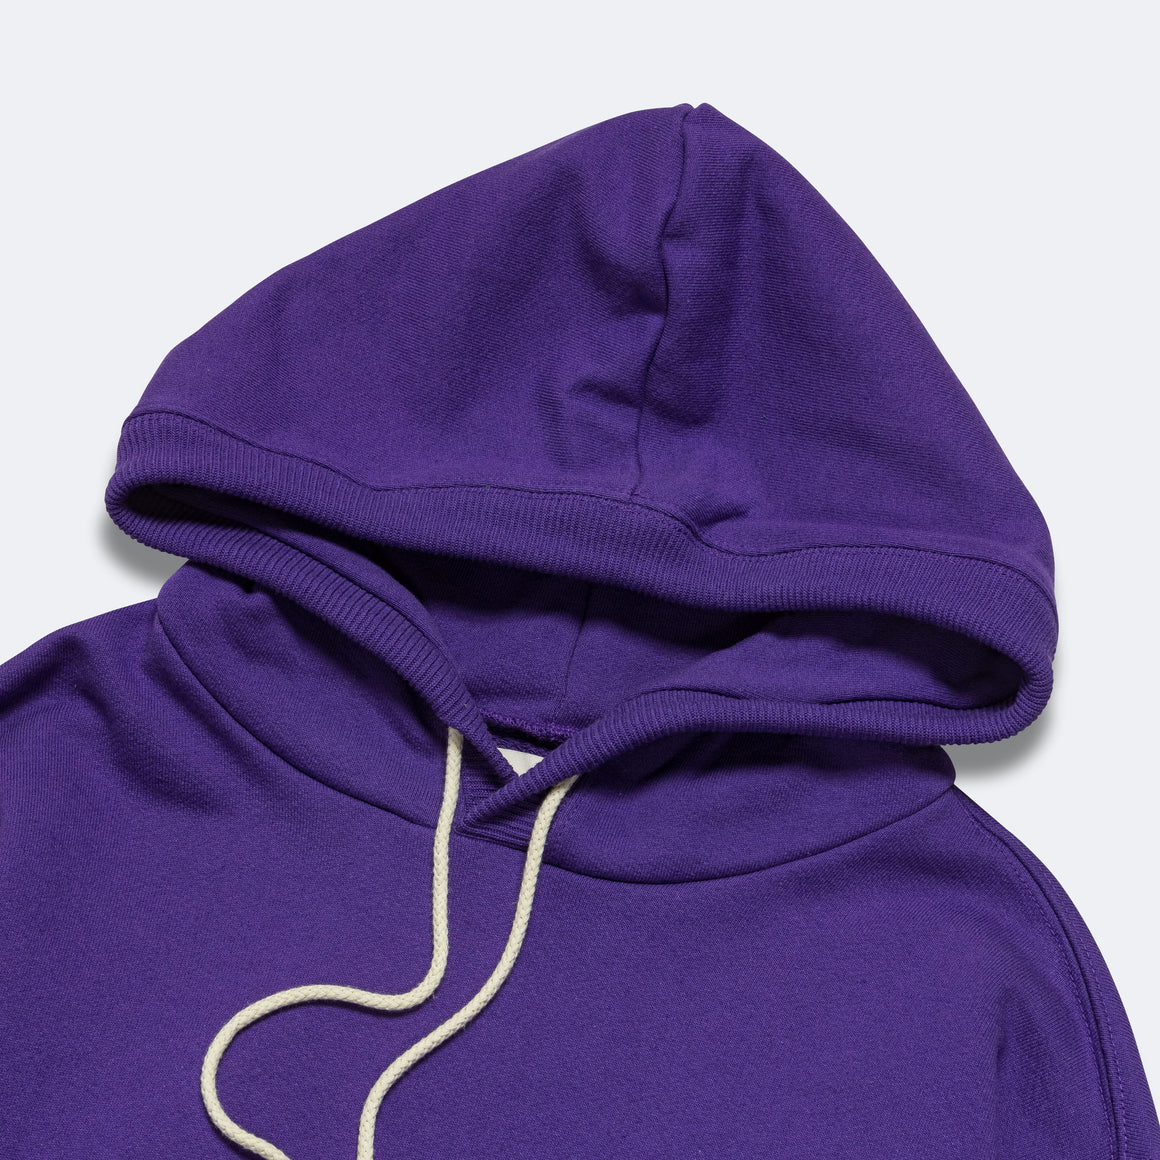 New Balance - MADE in USA Hoodie - Prism Purple - UP THERE